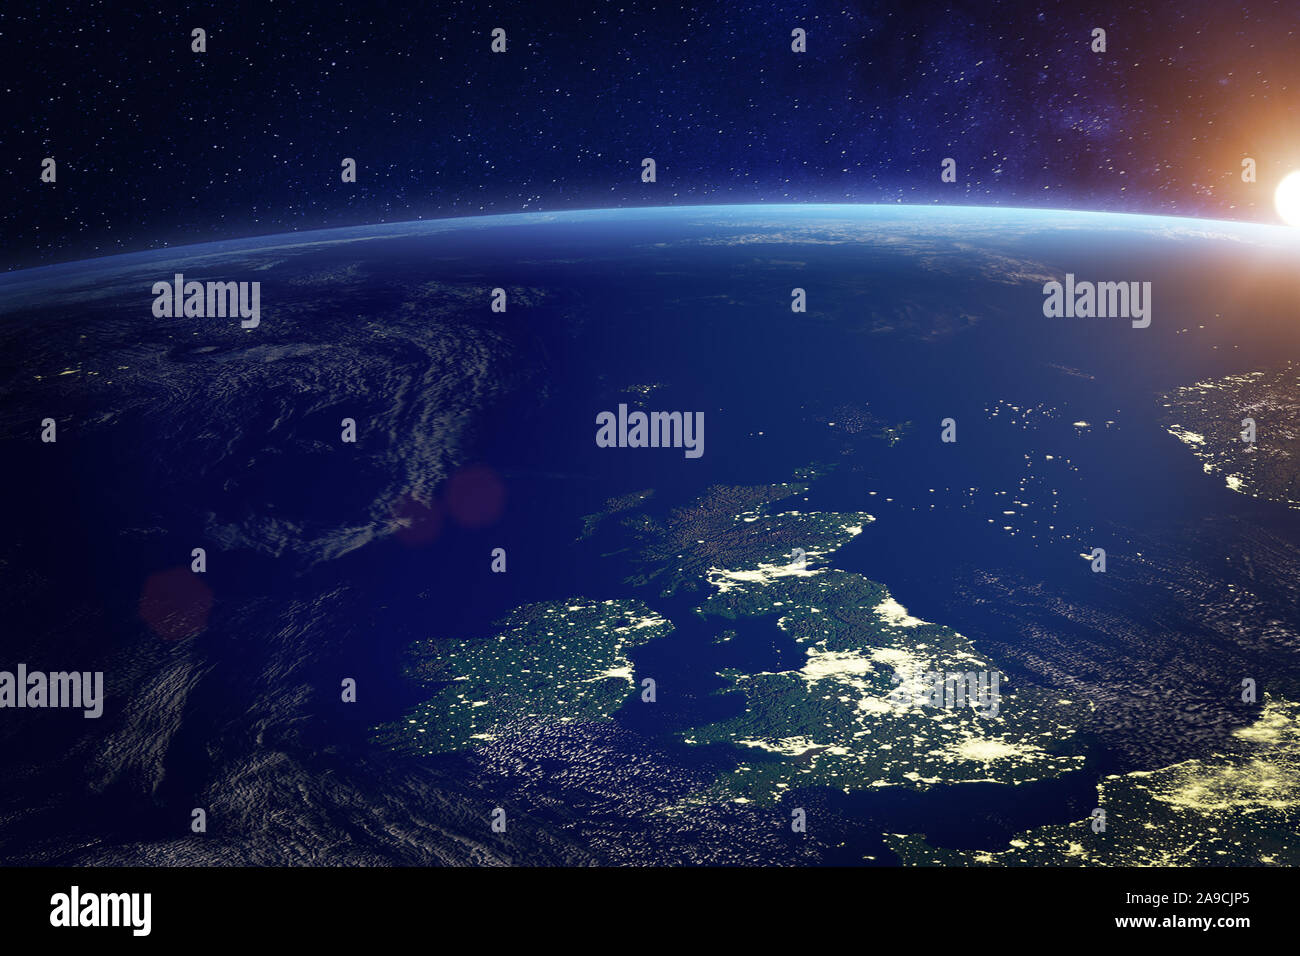 United Kingdom (UK) from space at night with city lights of the City of London, England, Wales, Scotland, Northern Ireland, communication technology, Stock Photo